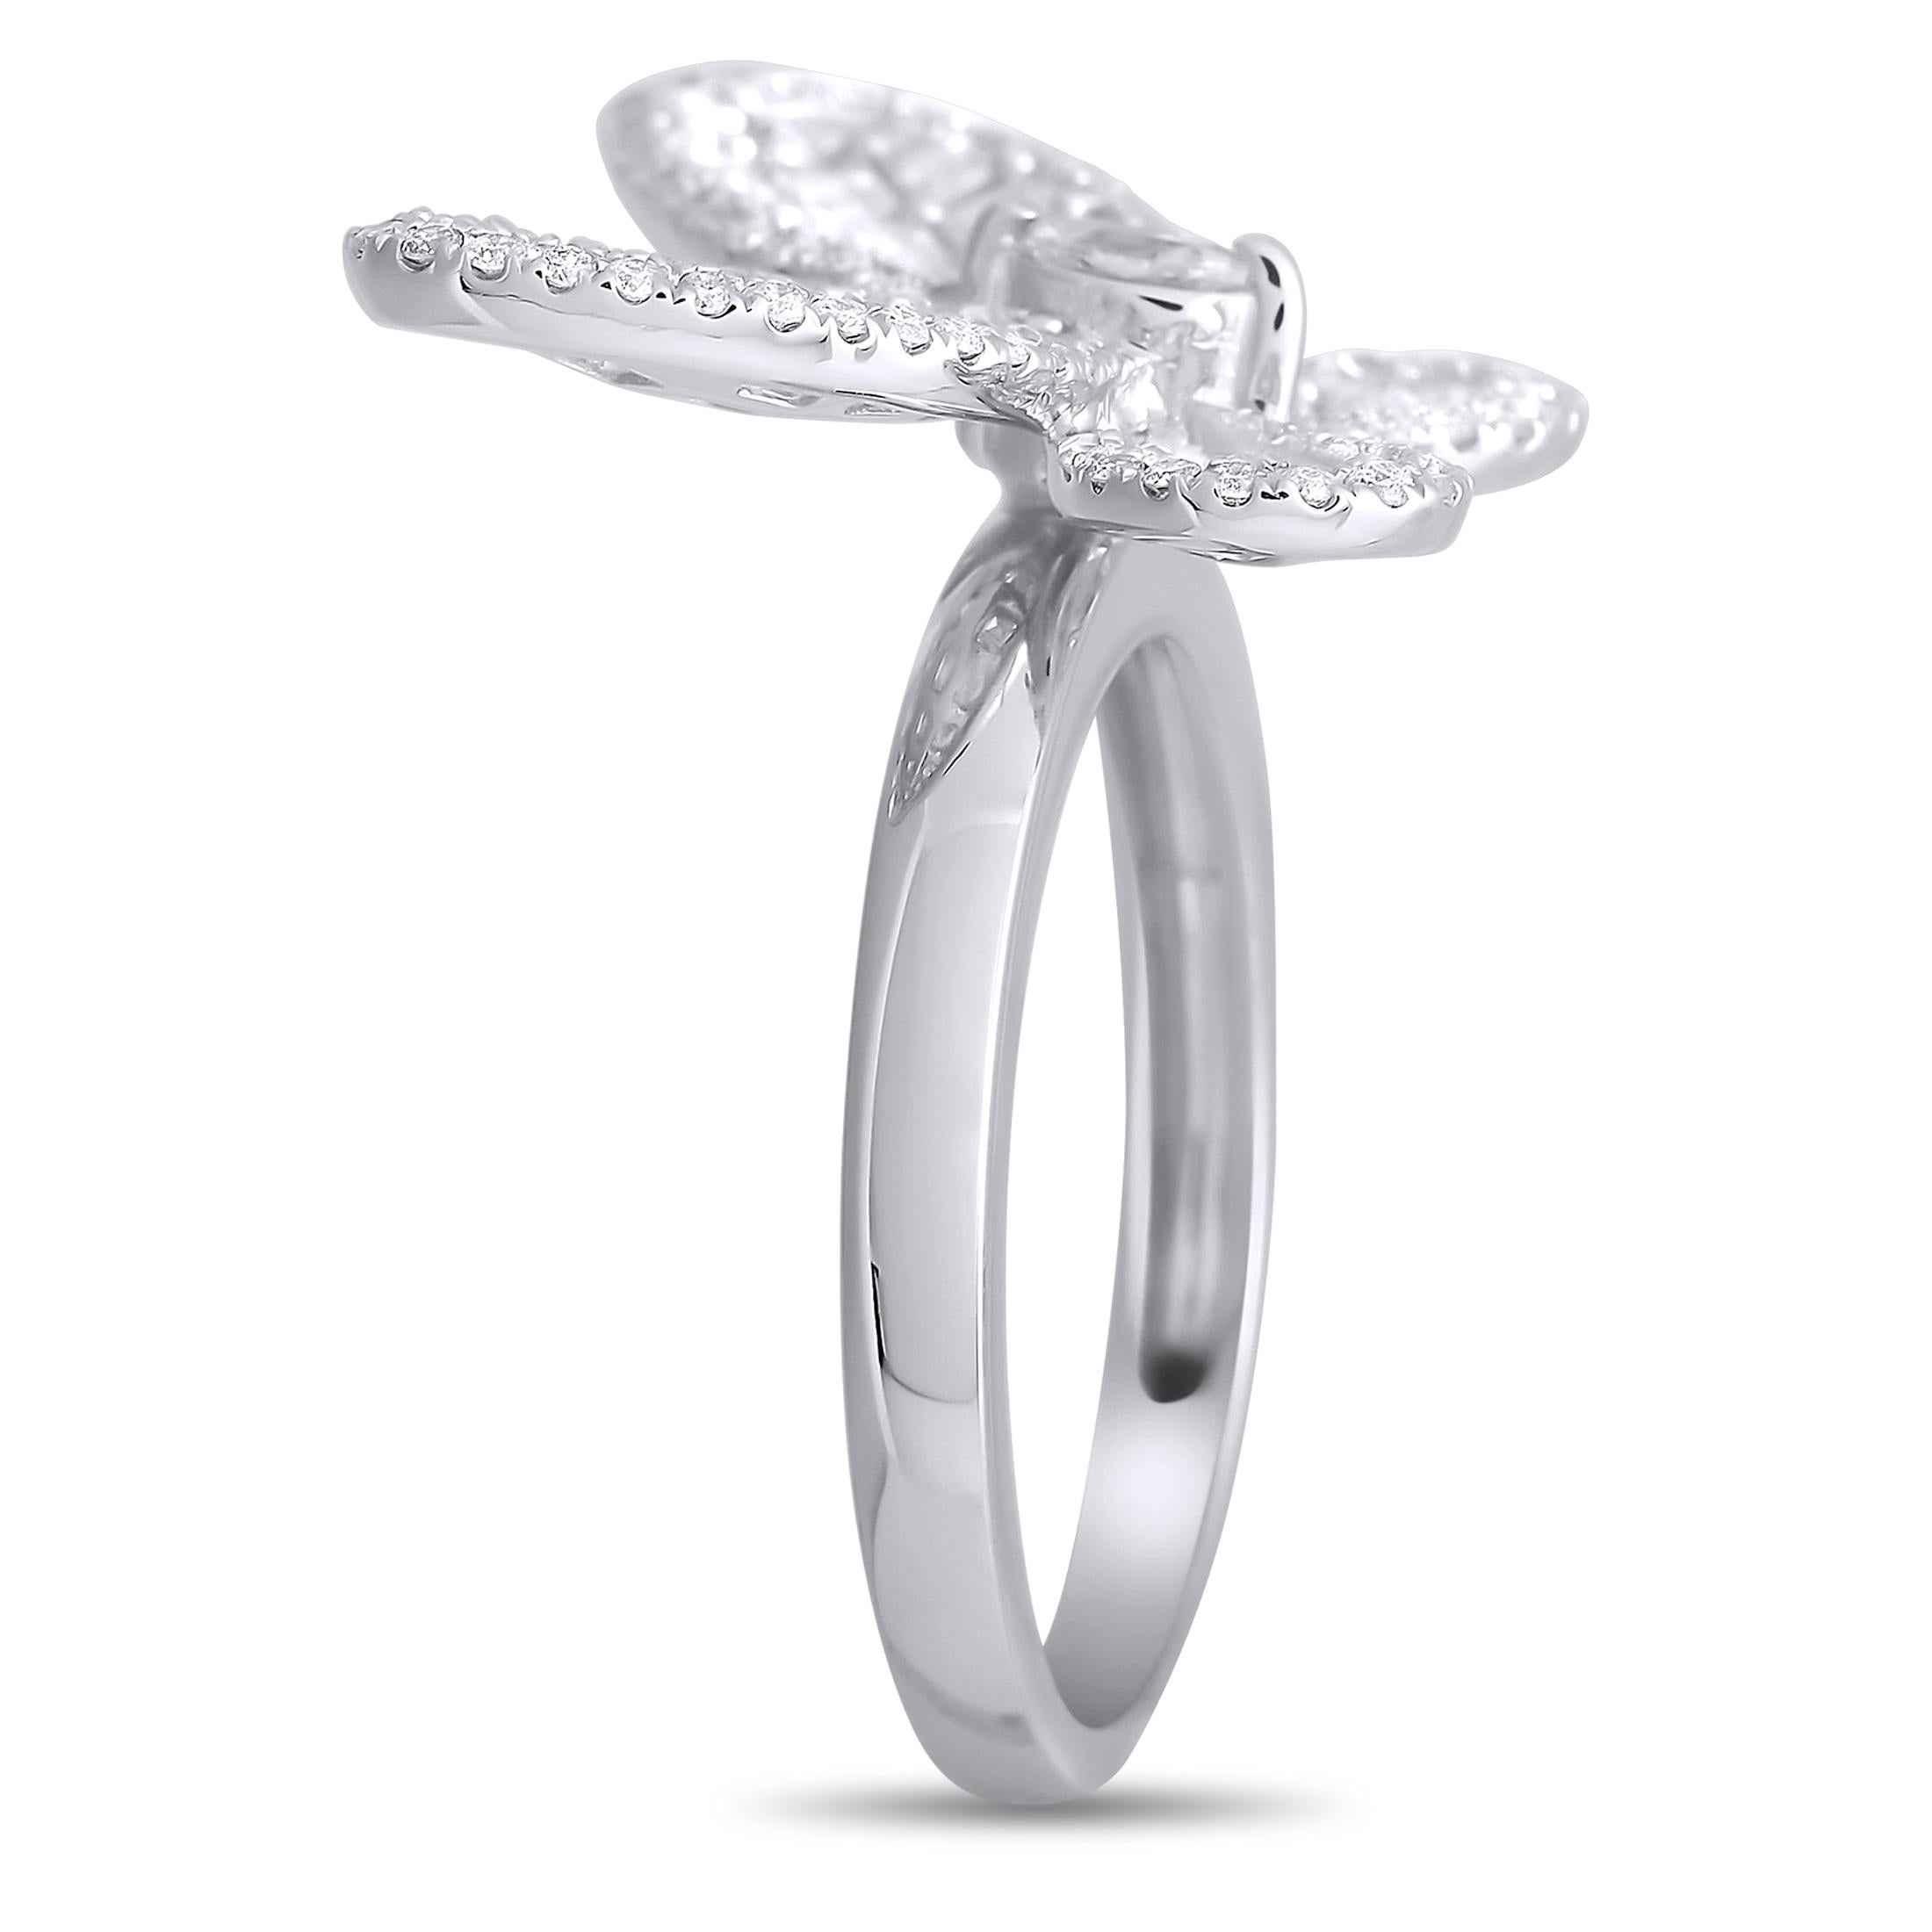 This pretty butterfly ring features a band that is made with 18K white gold, highlighting a butterfly set with a single marquise diamond in the center. 0.30 carats of Round diamonds outline the wings, and 0.91 carats of asscher diamonds fill in the